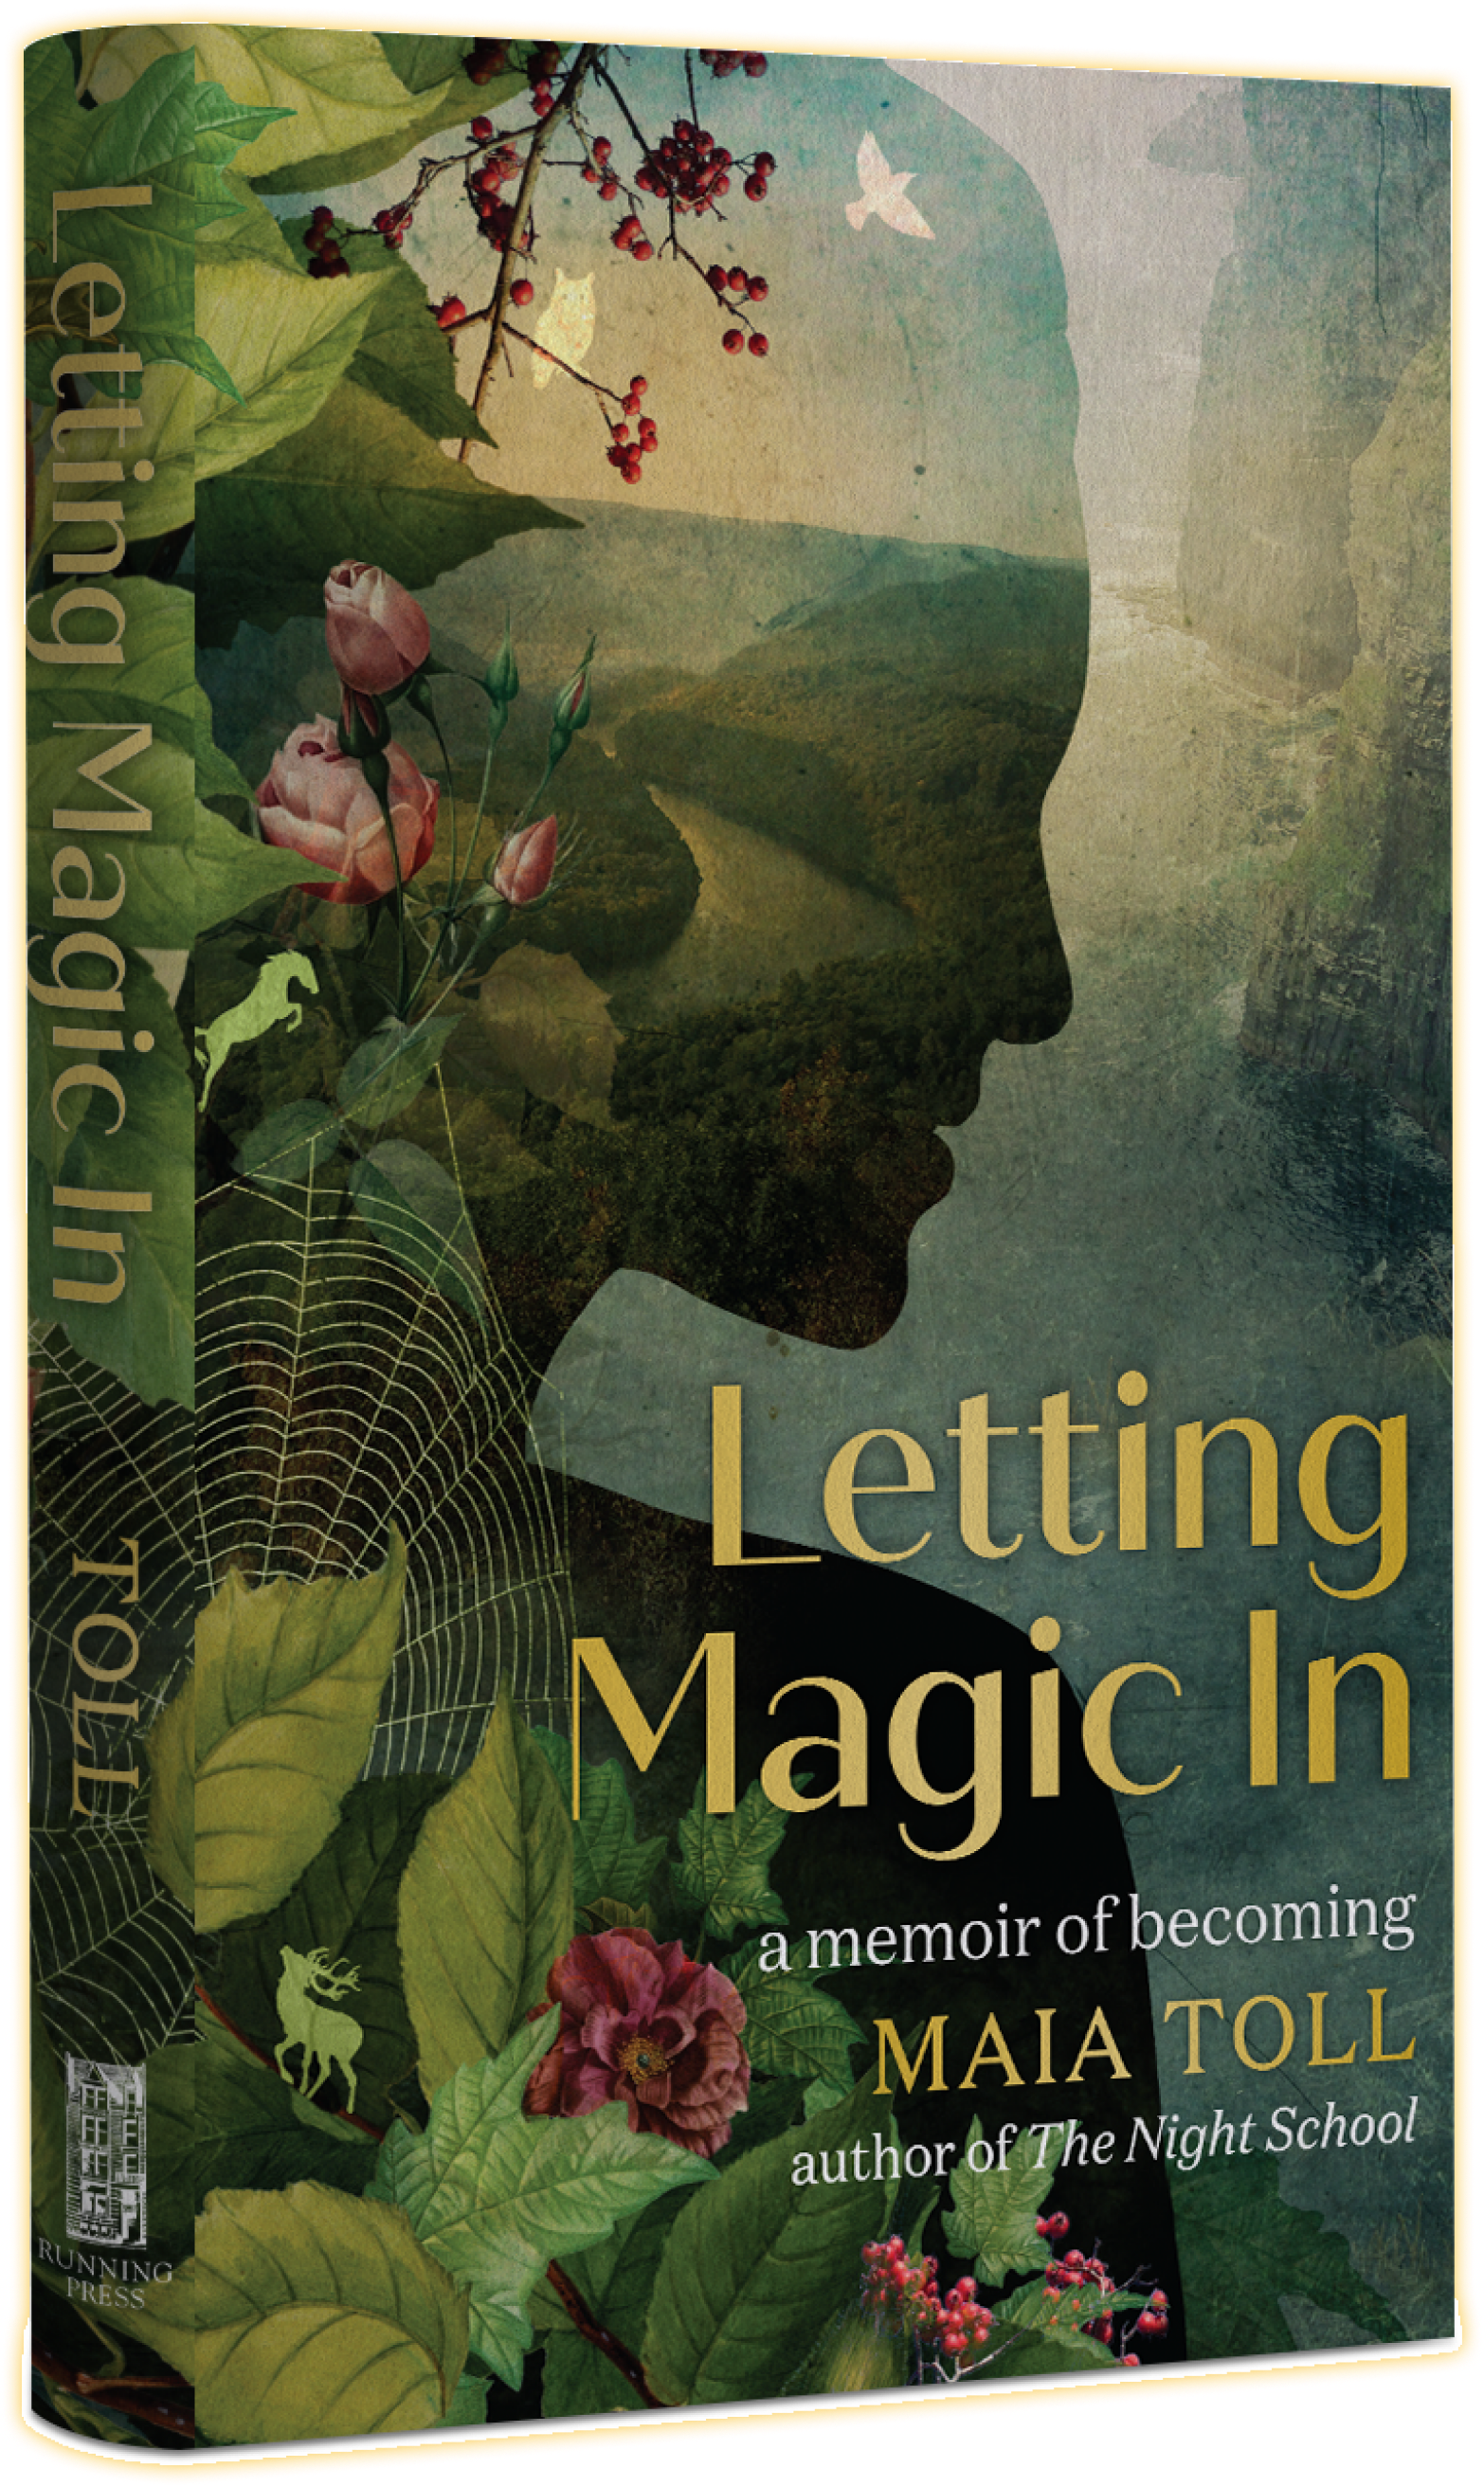 Letting Magic In: a memoir of becoming by Maia Toll